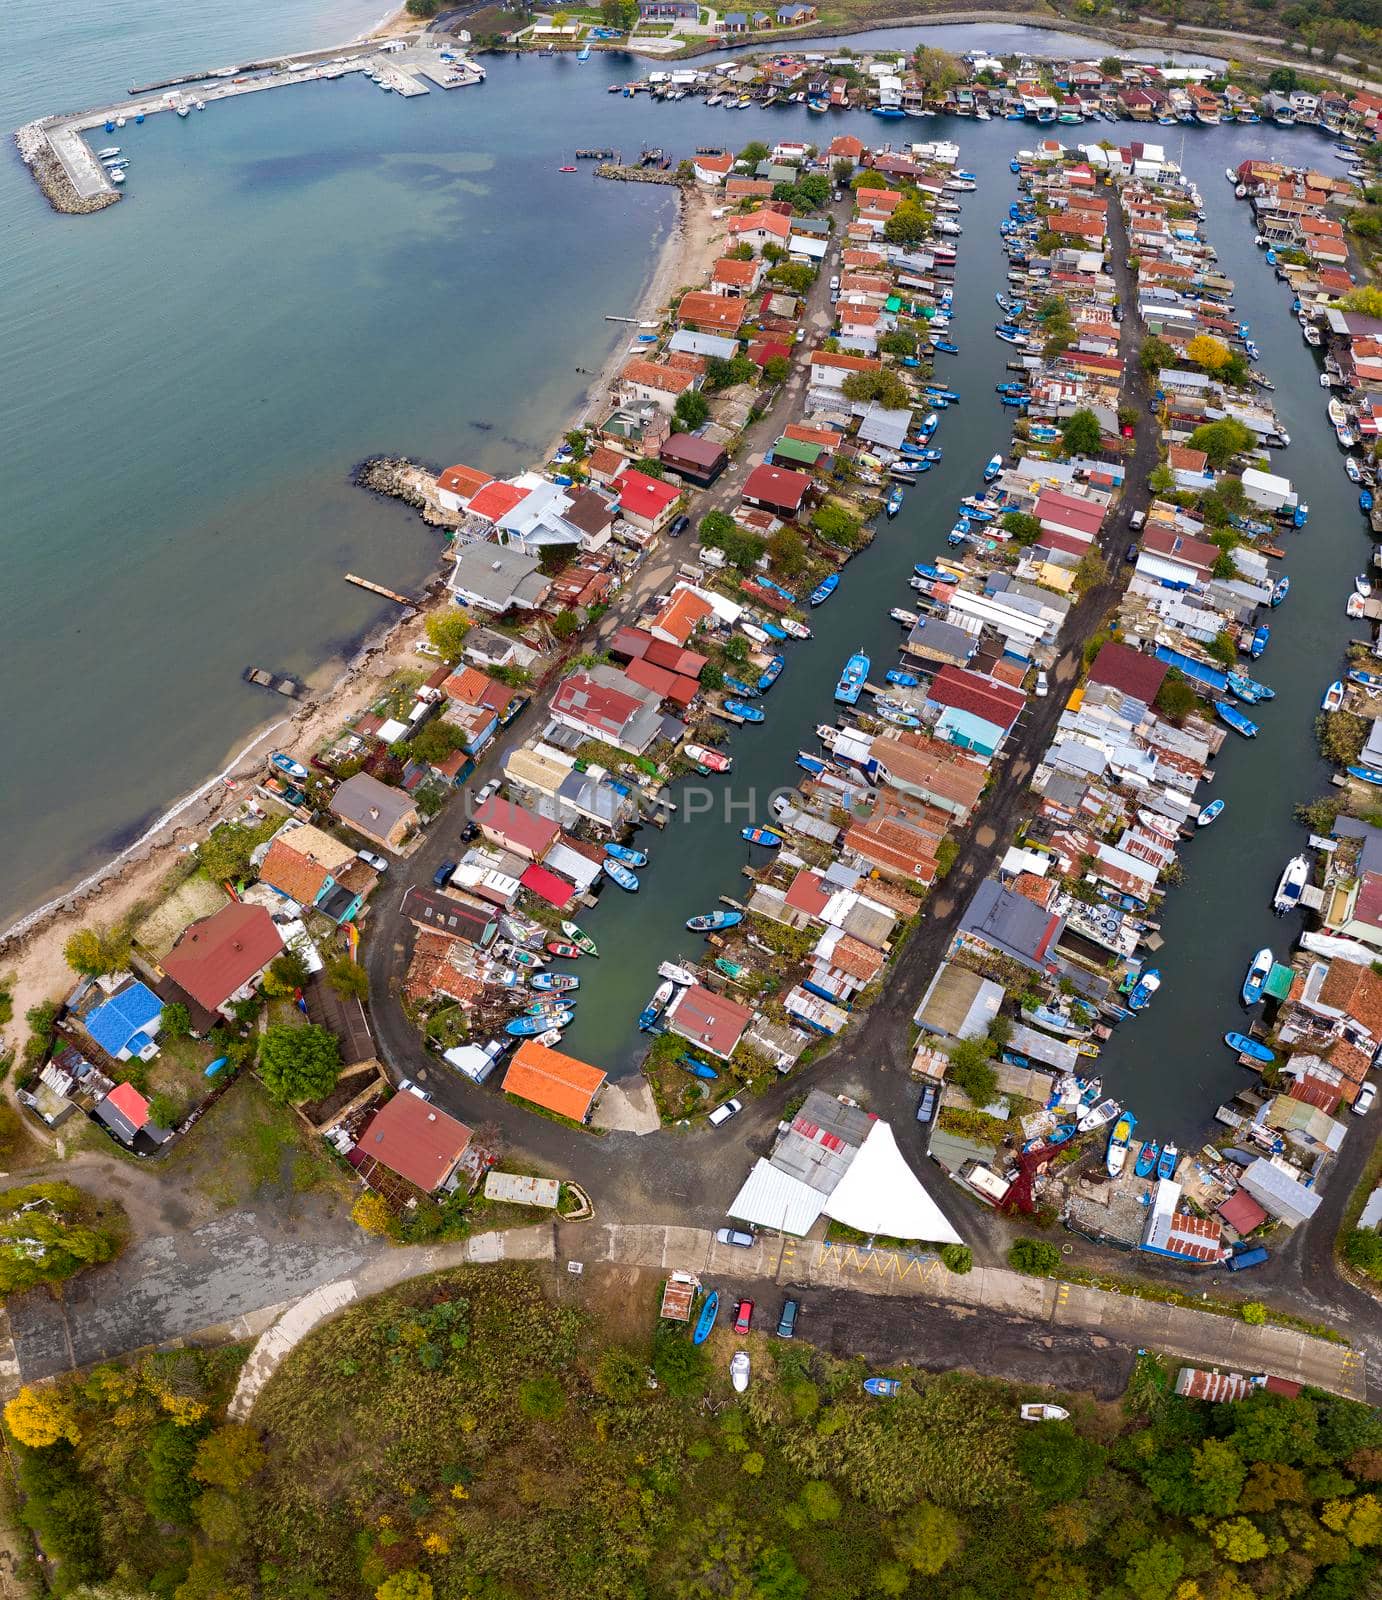 Aerial view of Chengene Skele - Fishing Village near the city of Burgas, Bulgaria by EdVal